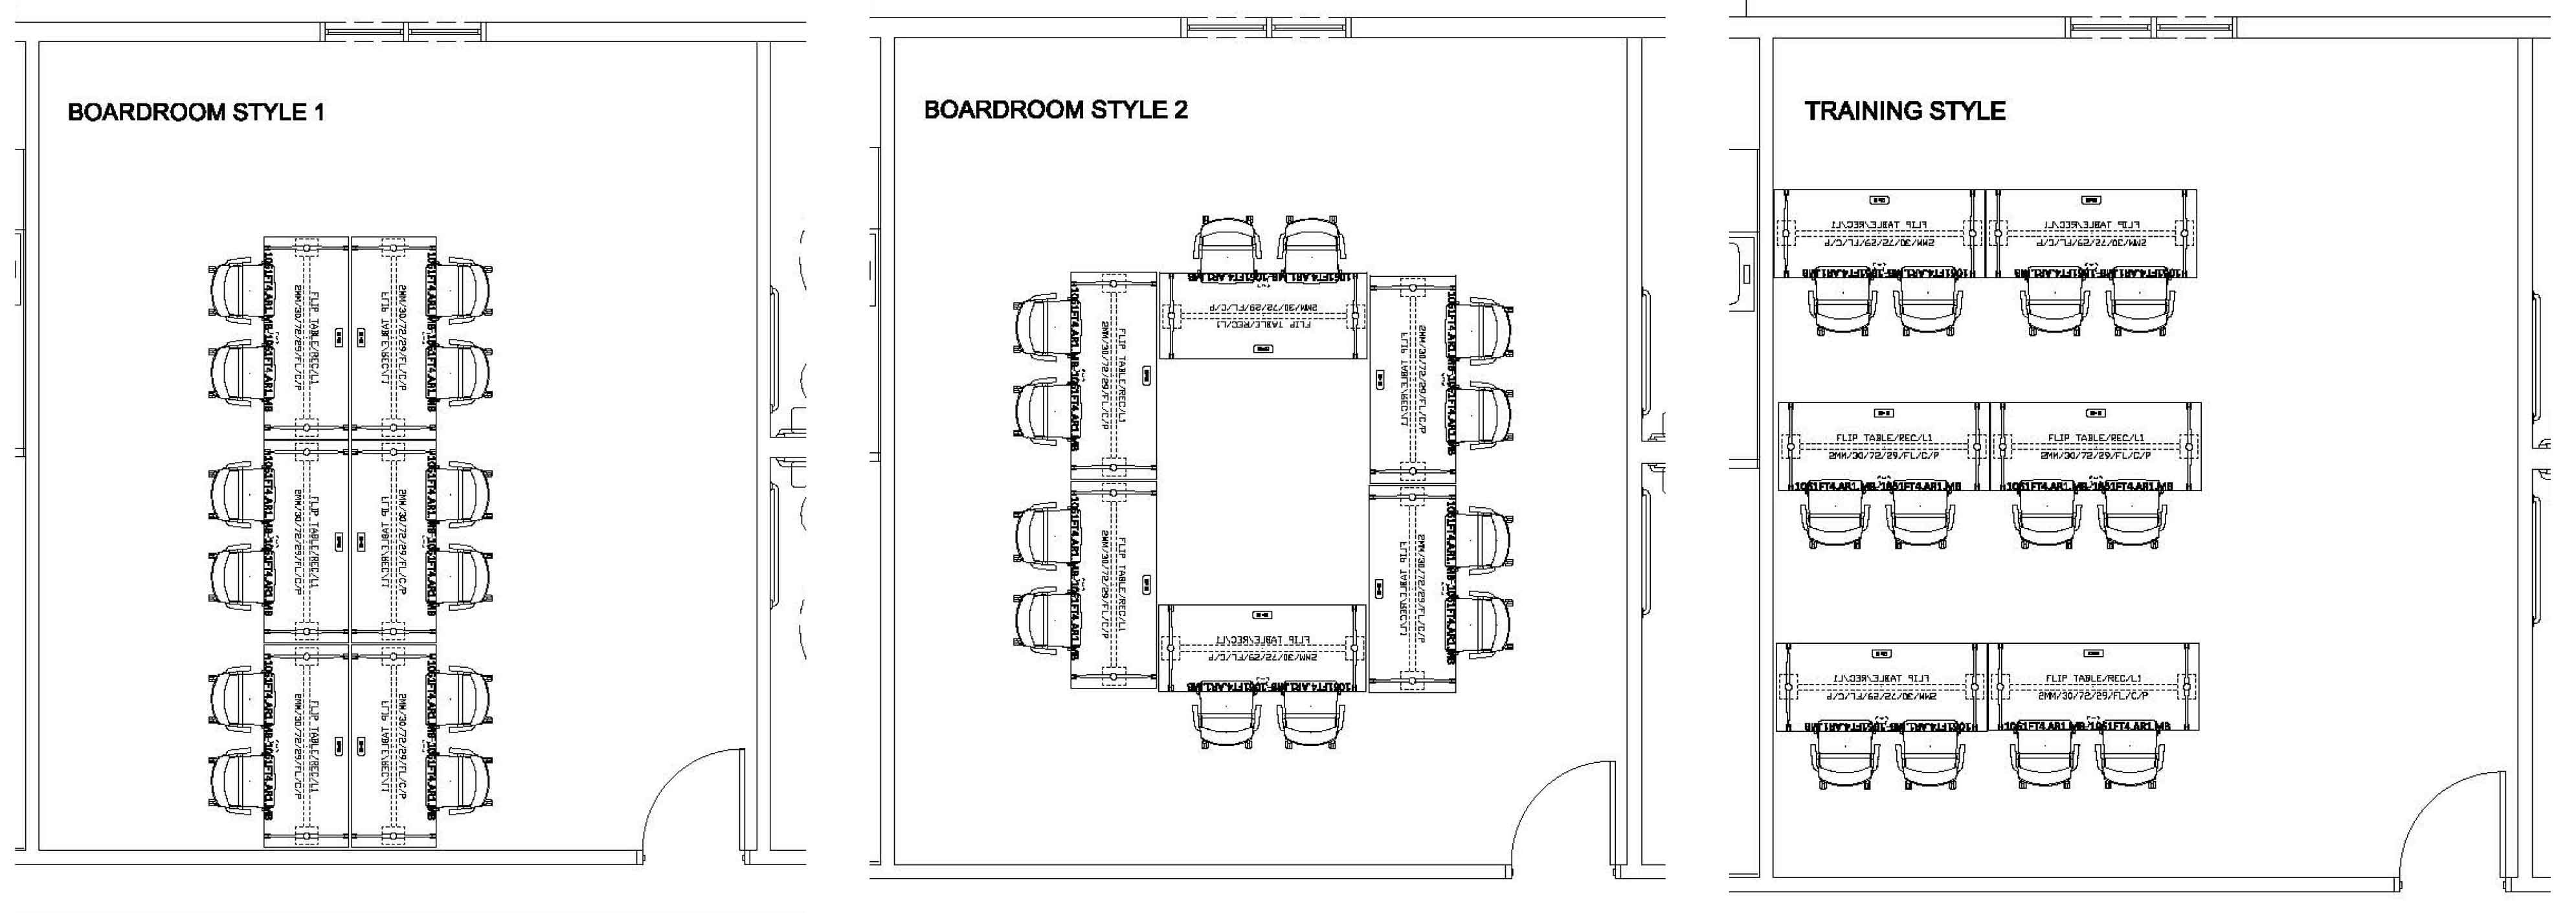 A floor plan featuring one meeting room with adaptable furnishings that's configurable for different employee layout needs.